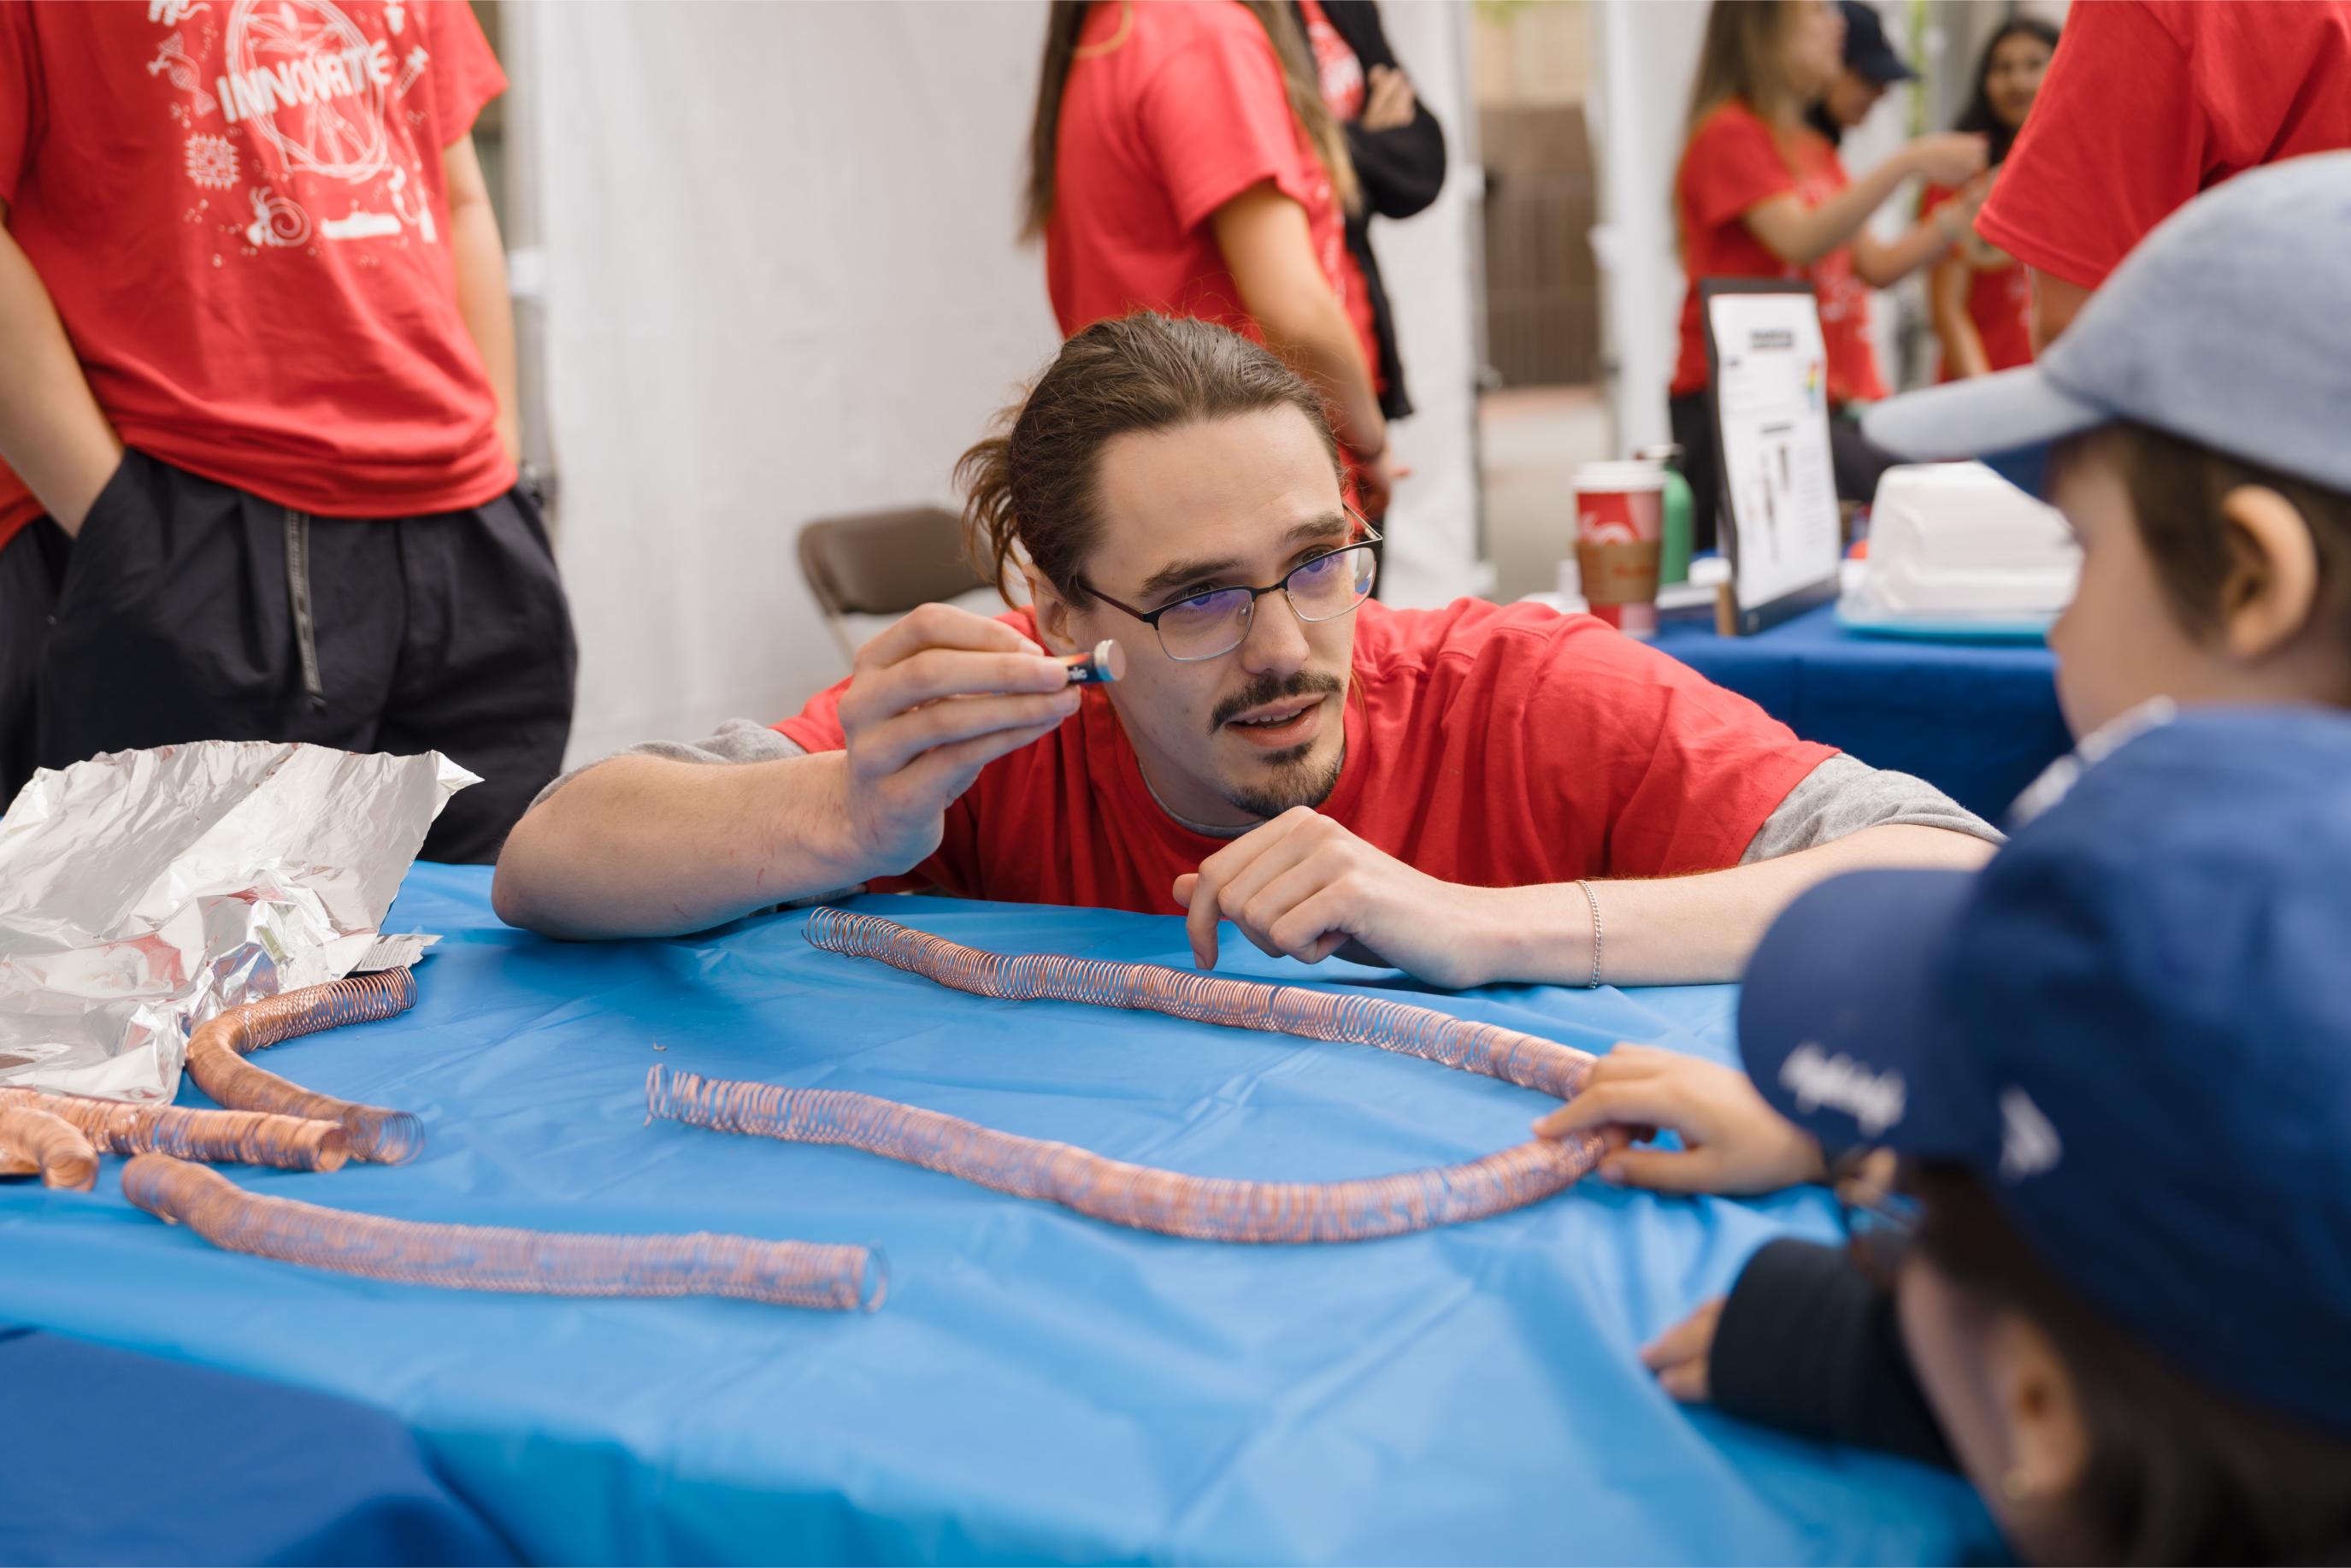 A volunteer engaging with participants at the Fun with Physics Booth.